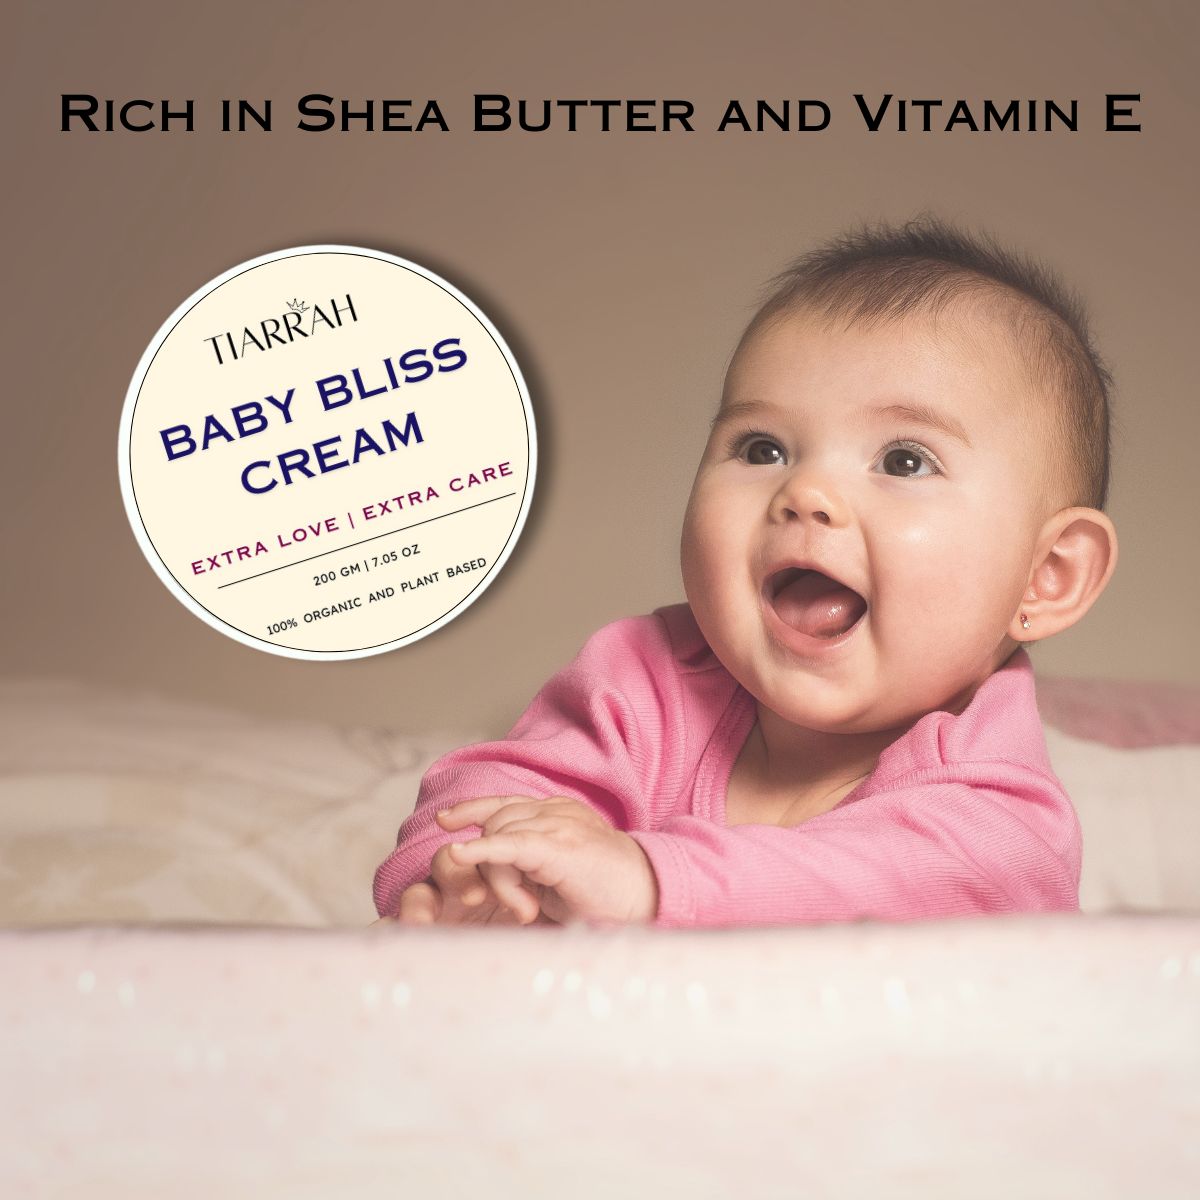 Luxury Baby Bliss Cream by Tiarrah: Organic, Non-Toxic - The Luxury Bath and Body Care Shop